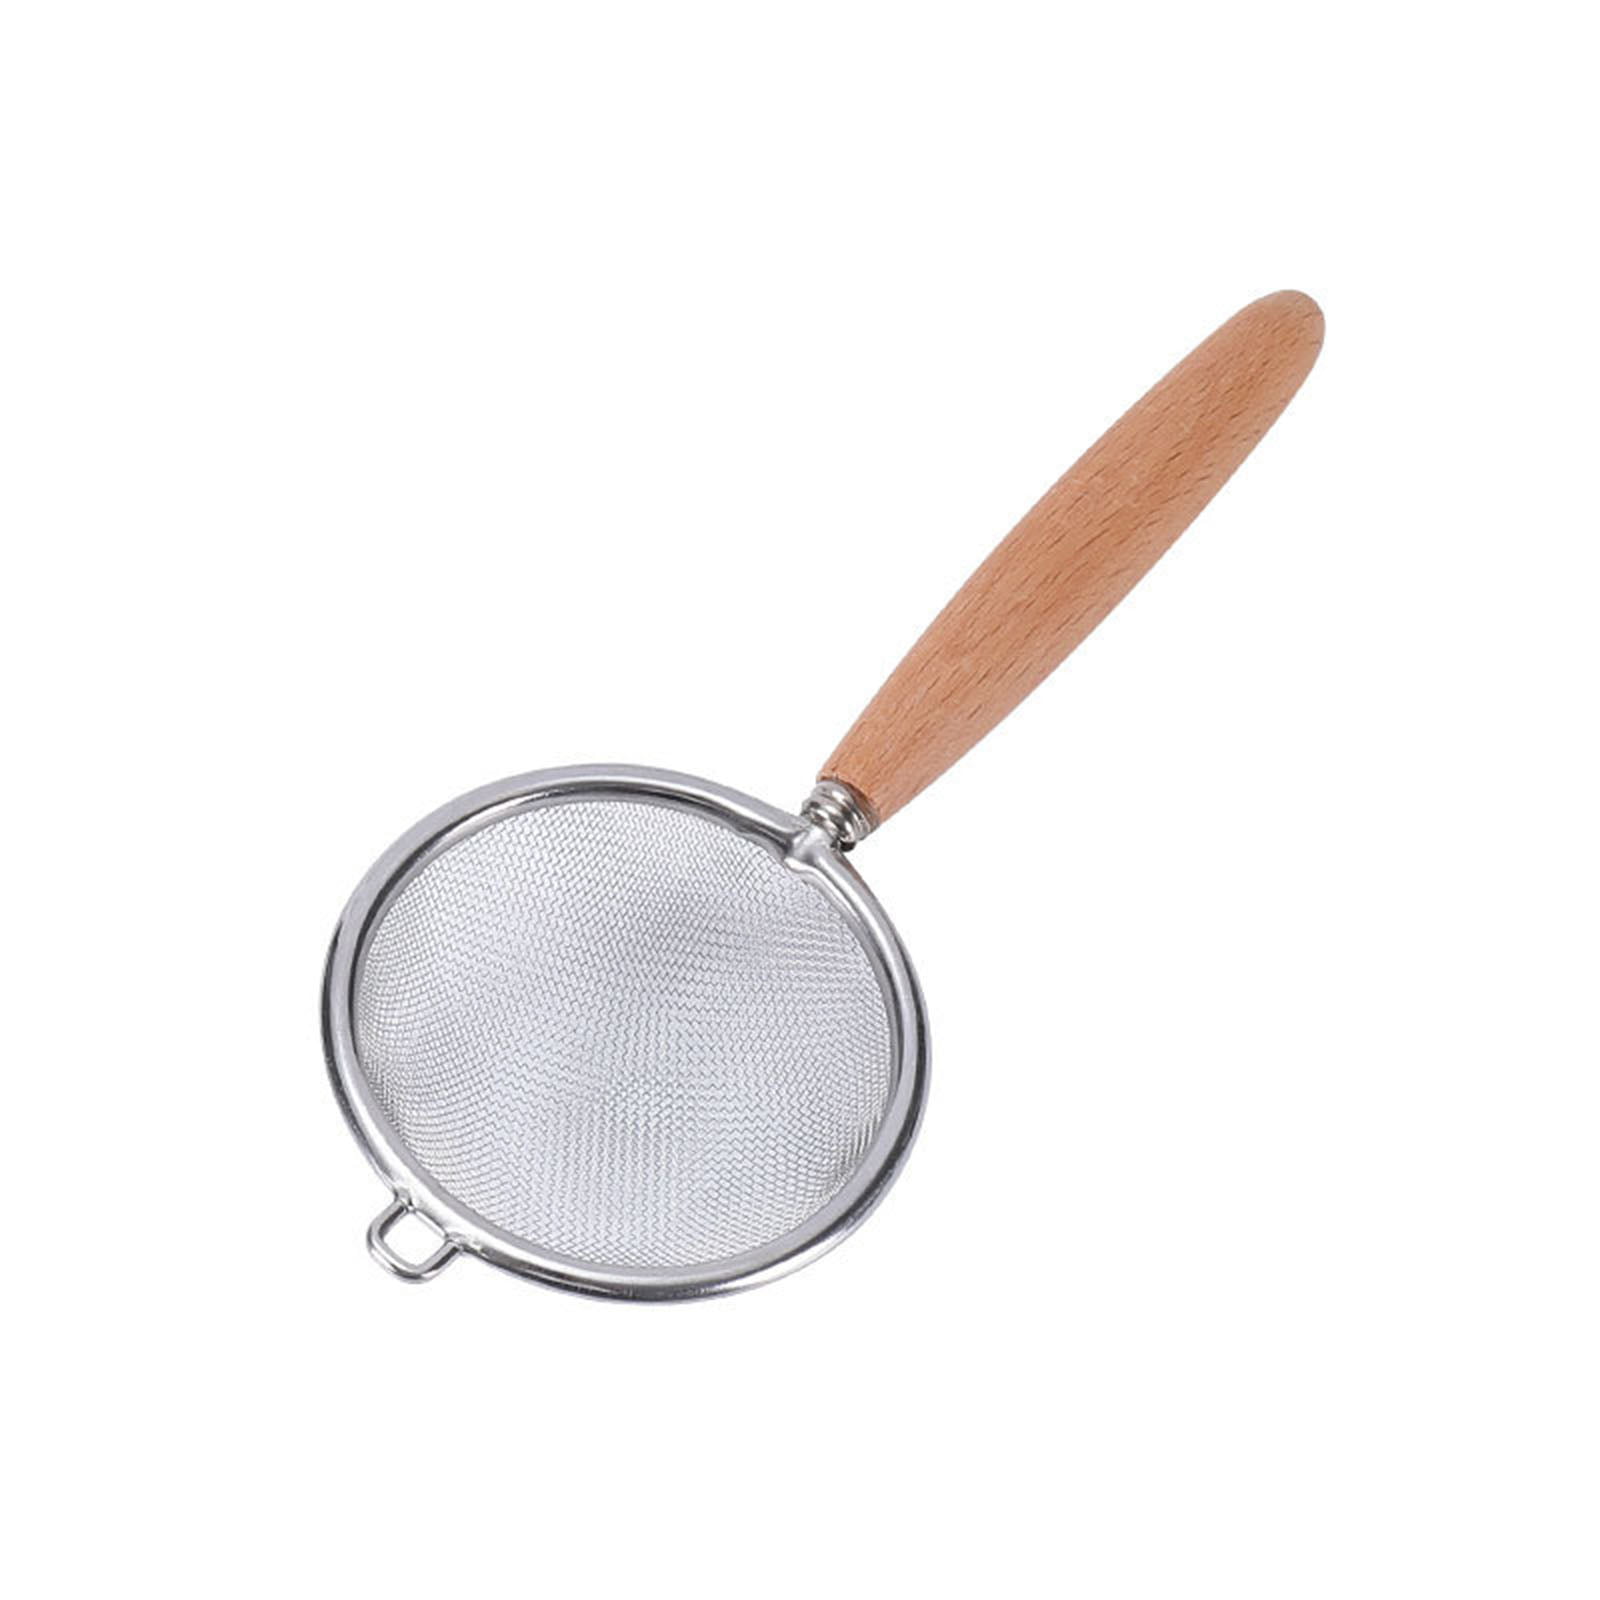 1 Pcs Stainless Steel Colander with Wooden Handle Mesh Strainer Oil Sieve Filter Kitchen Tools 